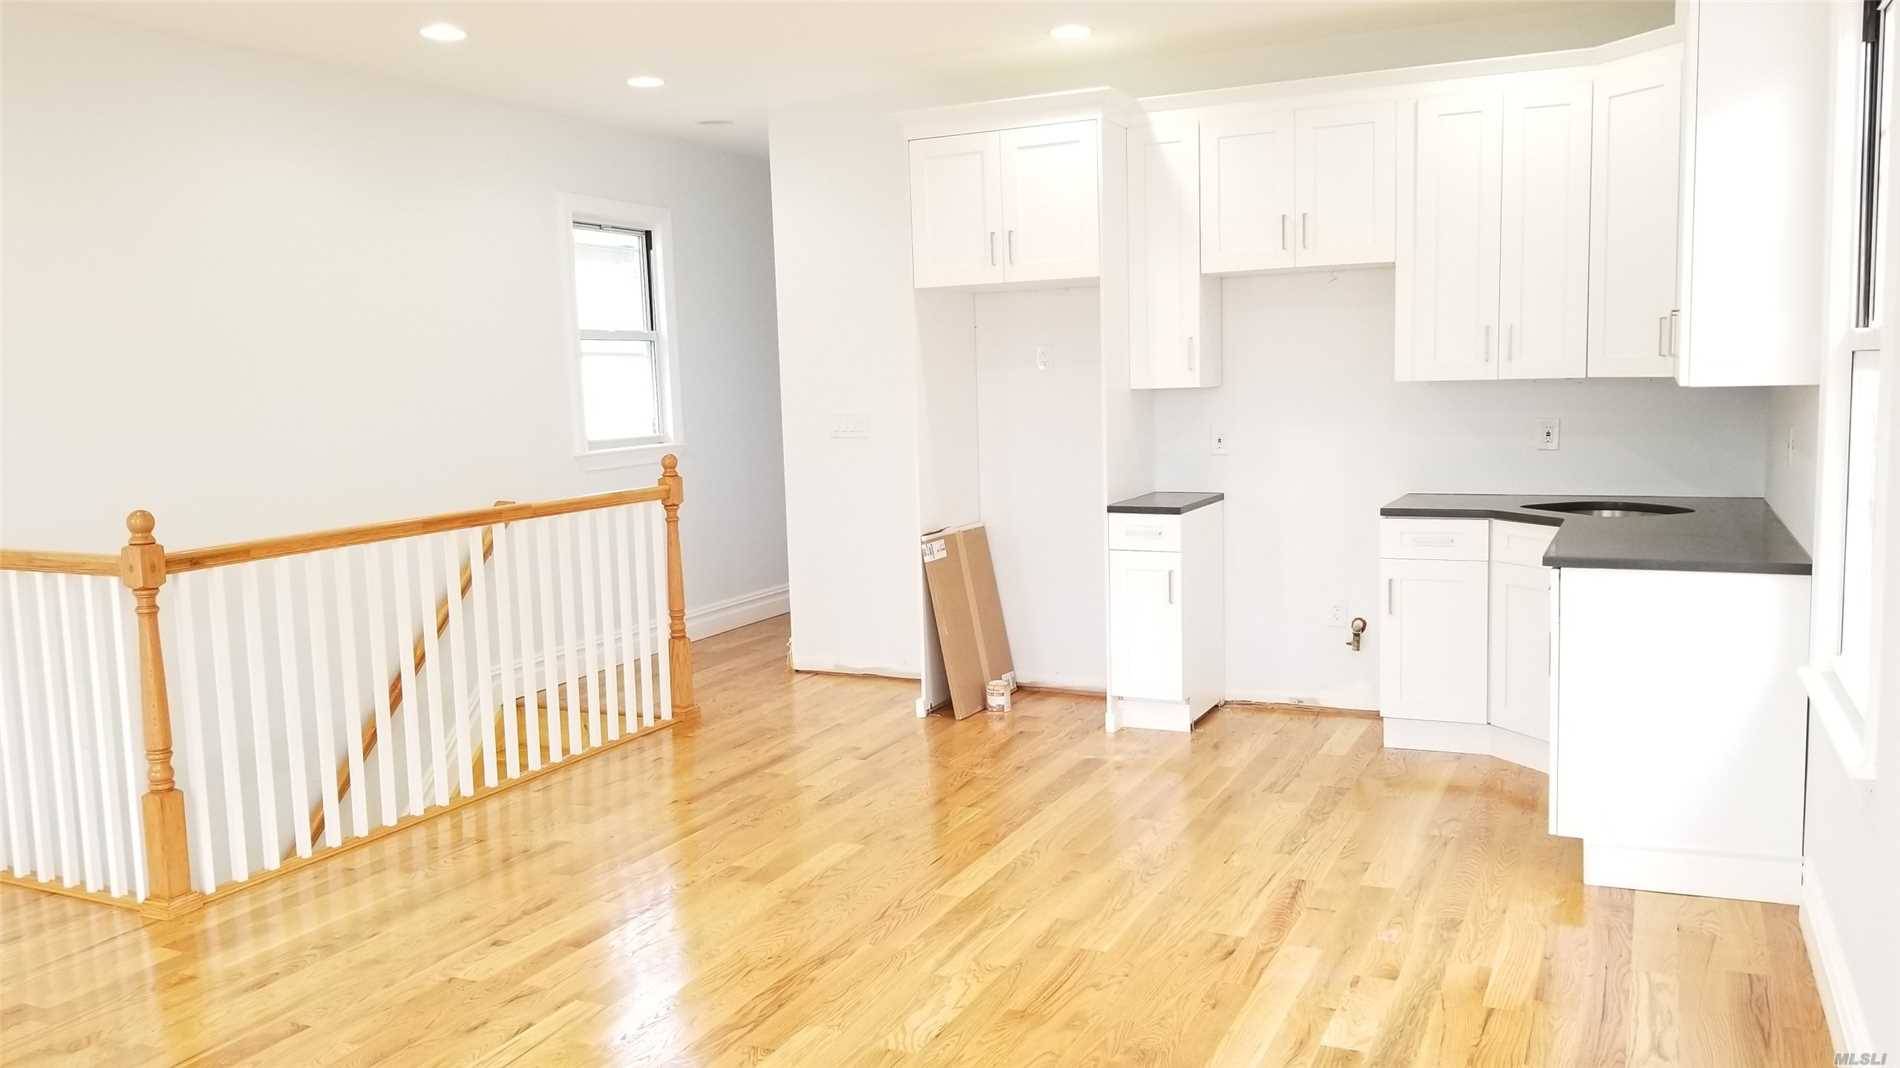 Fully Renovated 3 Bedroom Apartment On The 2nd Floor, Firs Floor, All New Kitchen And Bathrooms, New Hardwood Flooring, Windows And Much More.